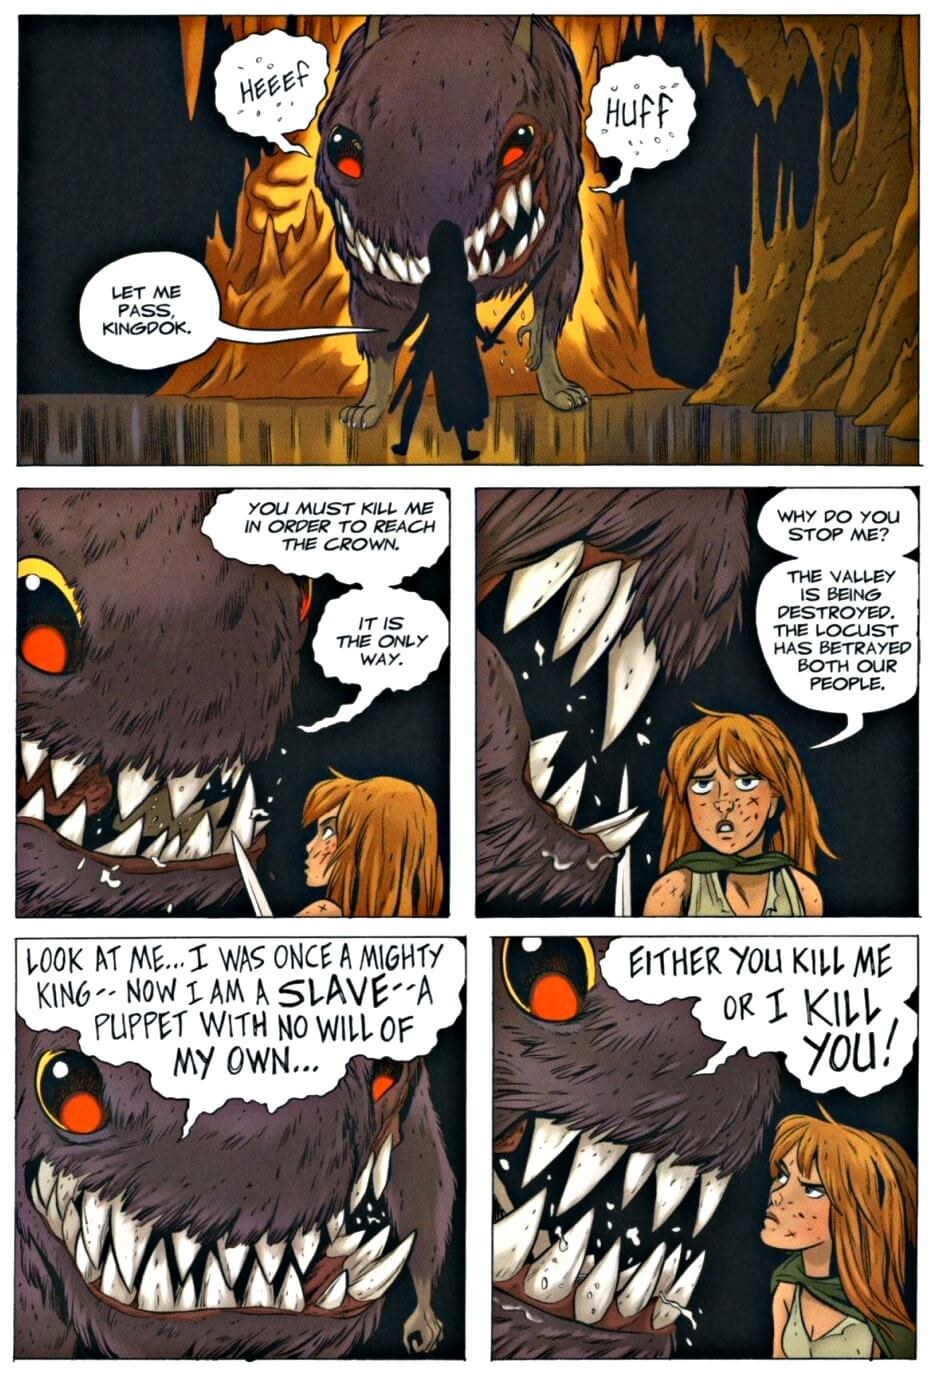 page 137 chapter 5 of bone 9 crown of horns graphic novel